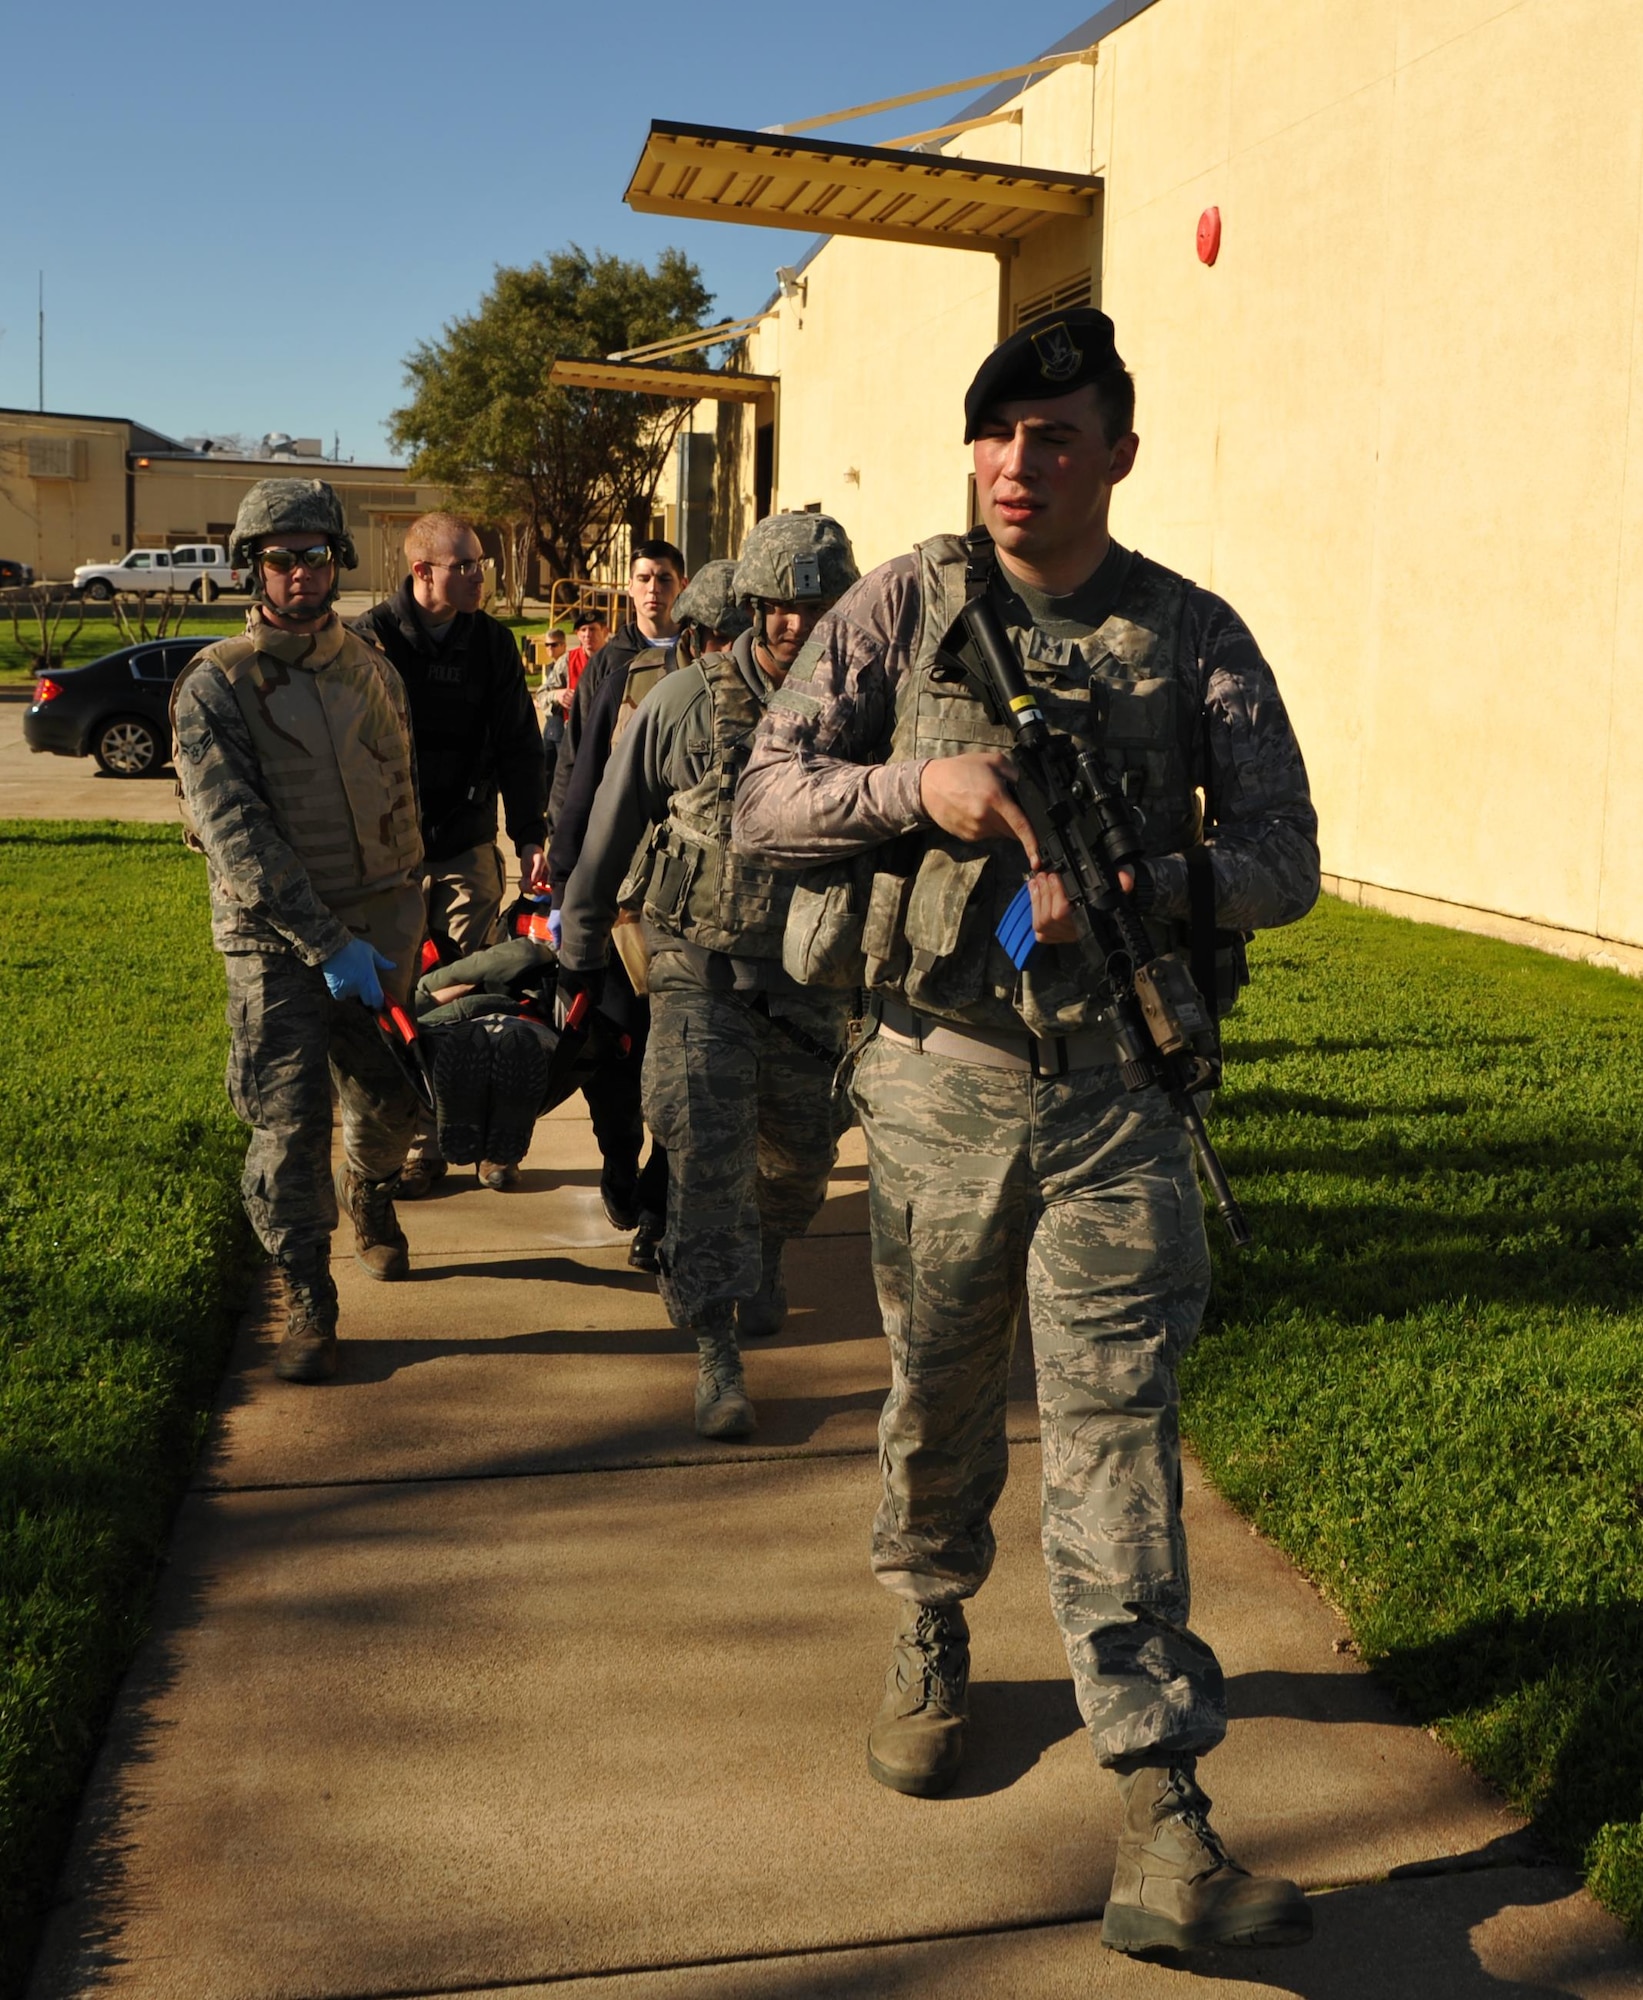 9th Security Forces personnel and first responders evacuate a wounded Airman during an active shooter exercise Jan. 13, 2017 at Beale Air Force Base, California. The exercise helped prepare units on base in the case of a real-world scenario. (U.S. Air Force photo/Airman Tristan D. Viglianco)